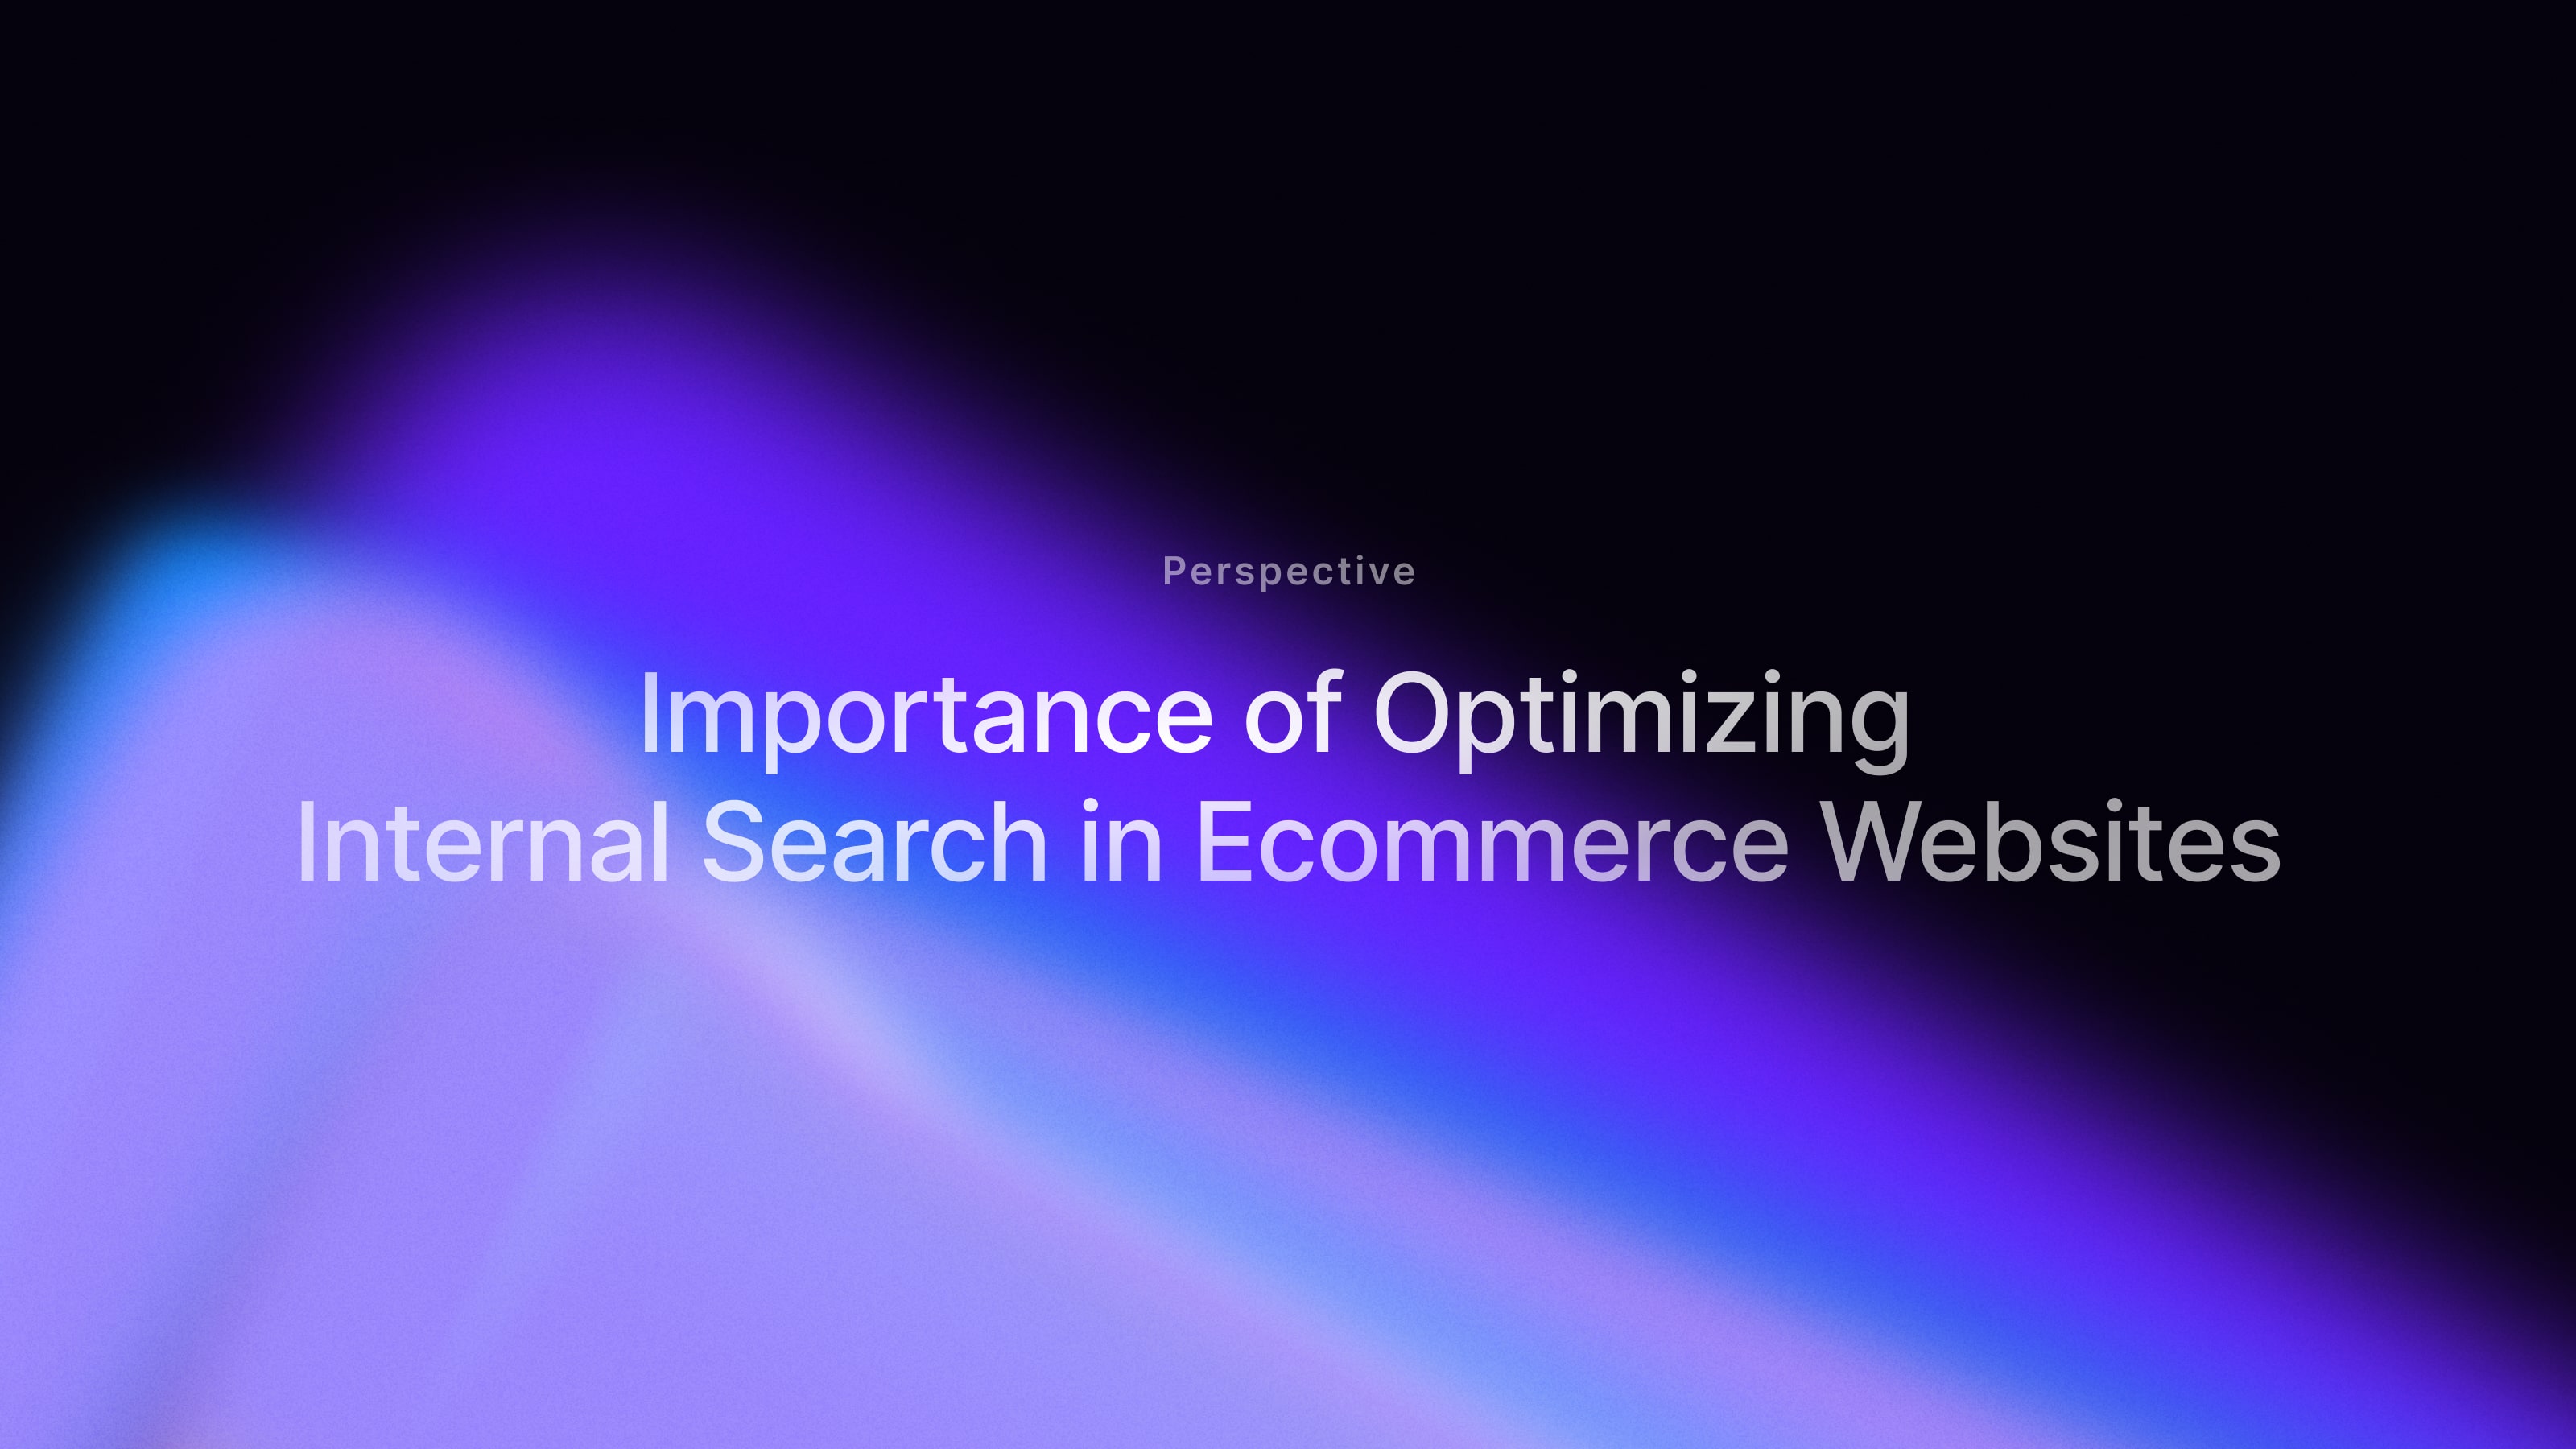 Importance of Optimizing Internal Search in Ecommerce Websites